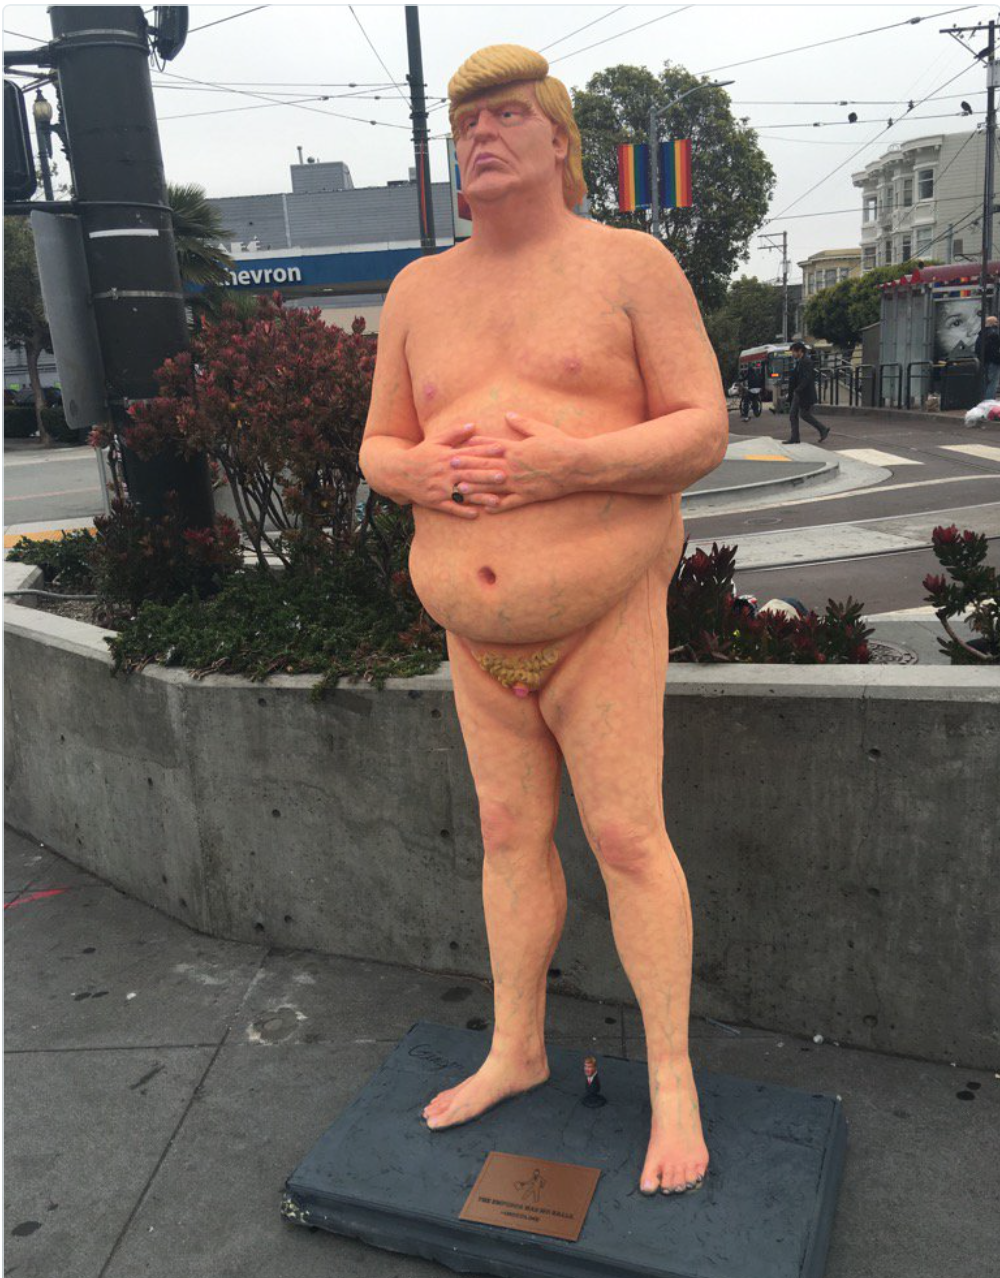 Naked Donald Trump Statues Popping Up Everywhere.